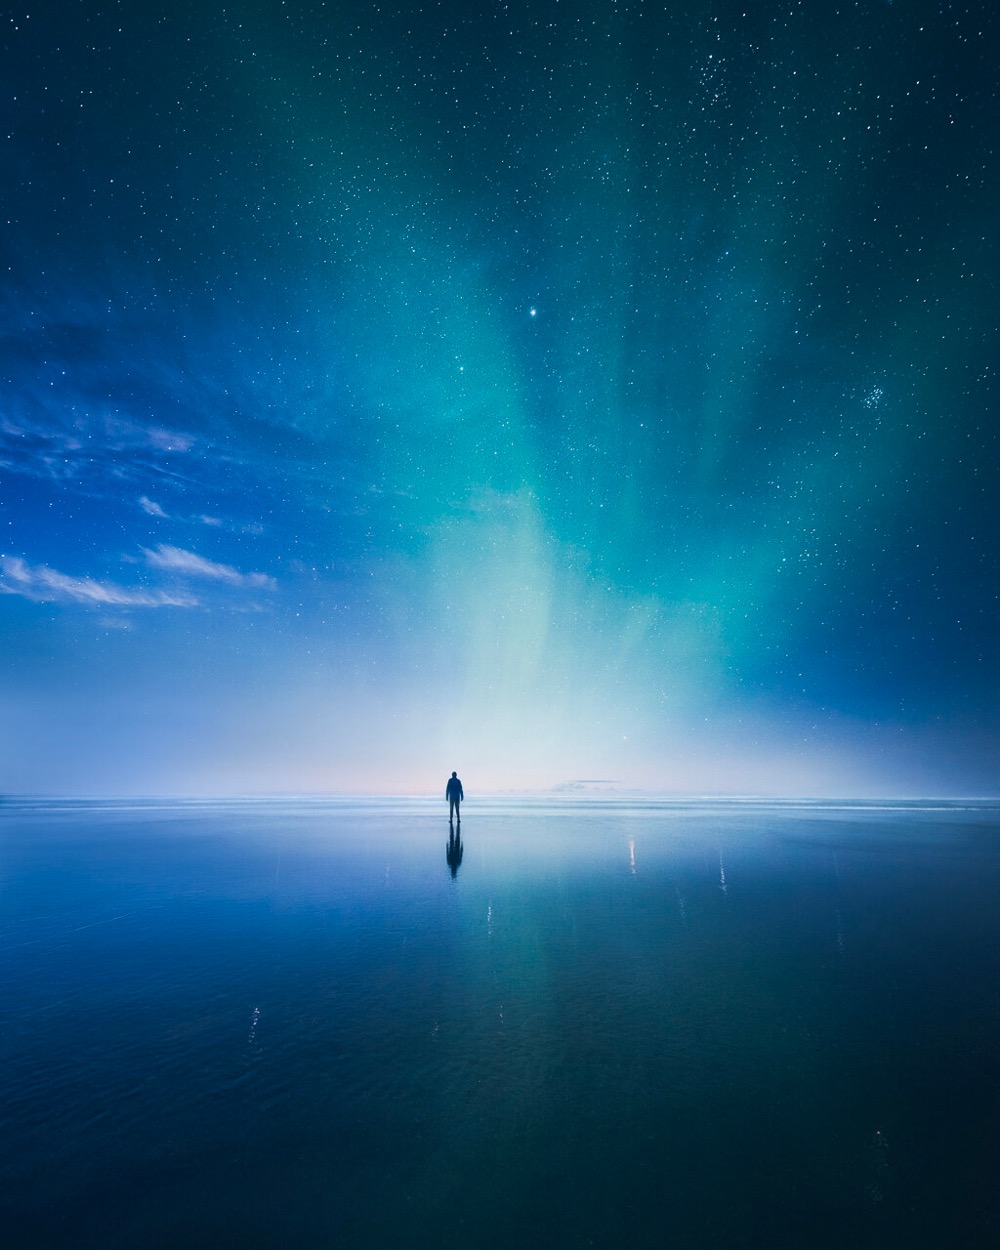 a man standing on a reflective surface under a brilliant blue night sky